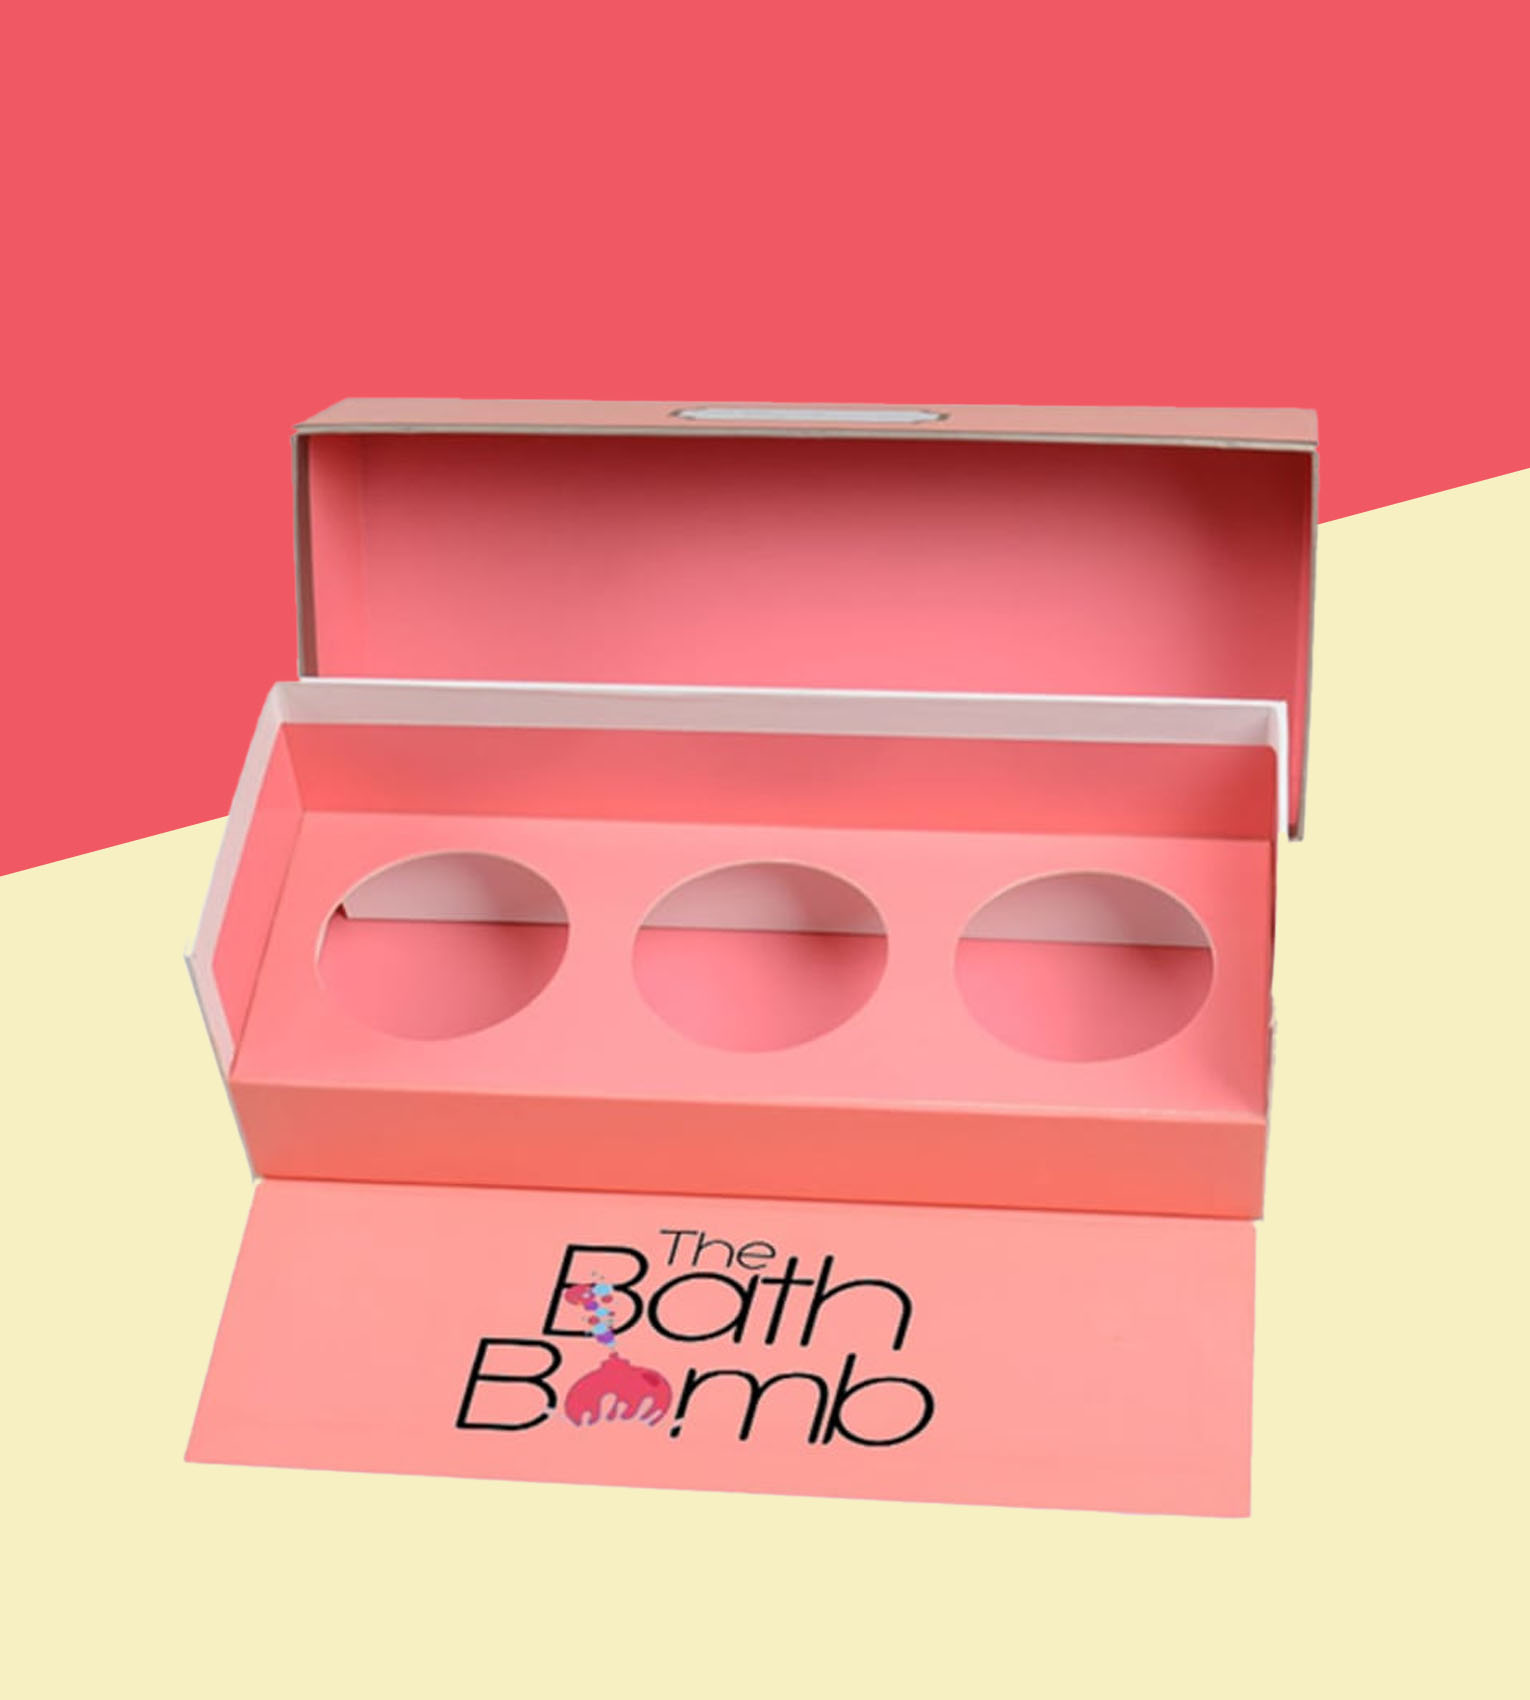 Bath Bomb Boxes With Inserts